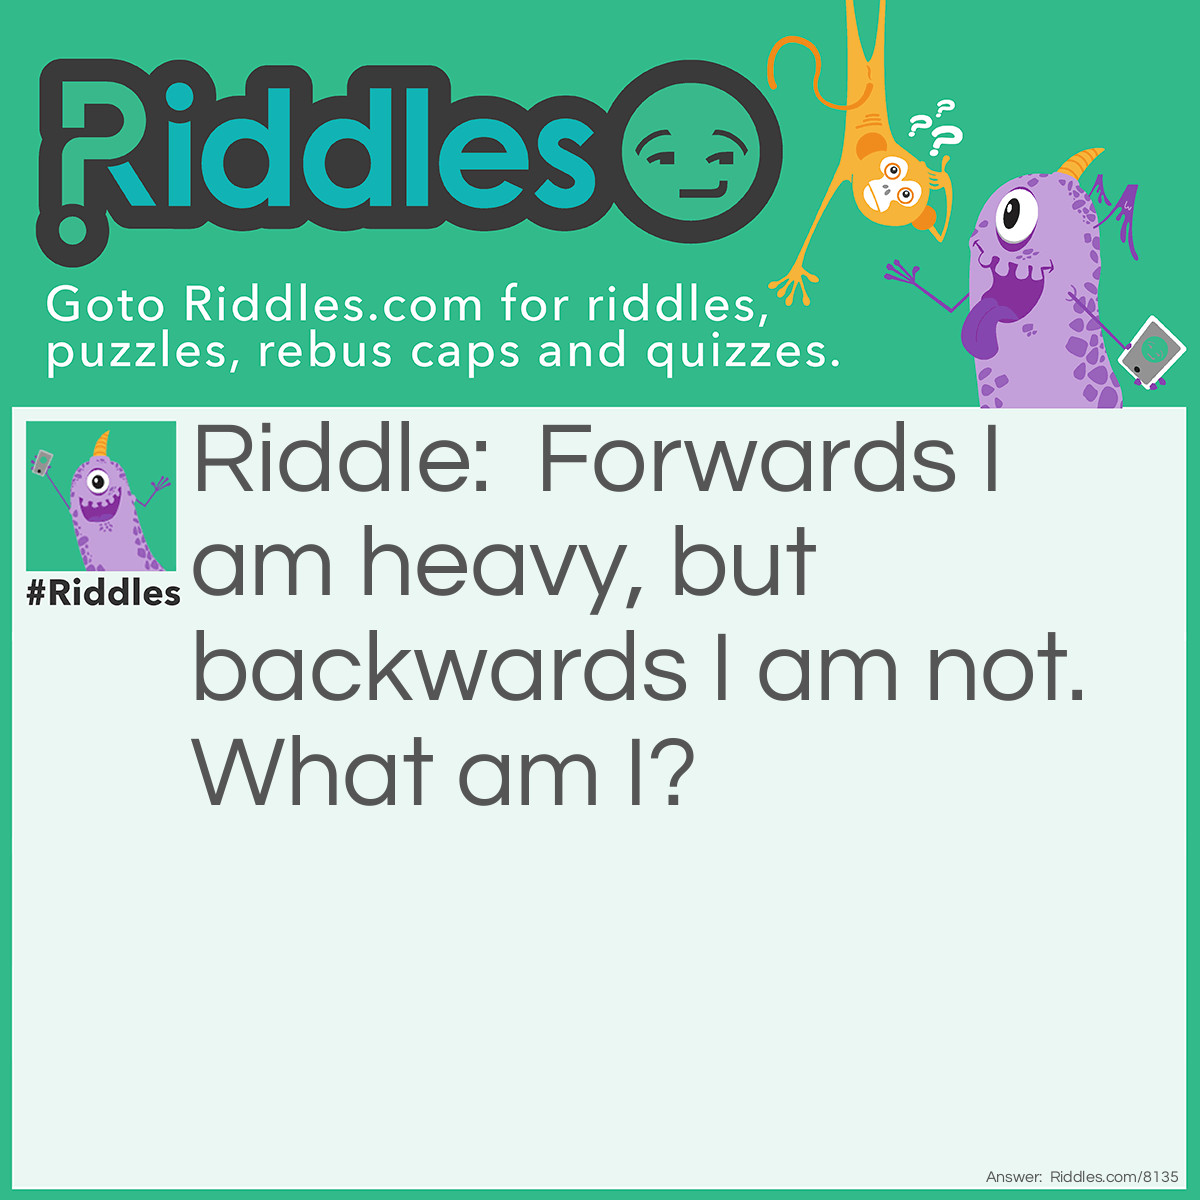 Riddle: Forwards I am heavy, but backwards I am not. What am I? Answer: A “ton” A ton is really heavy, and backwards it is spelled “not.”